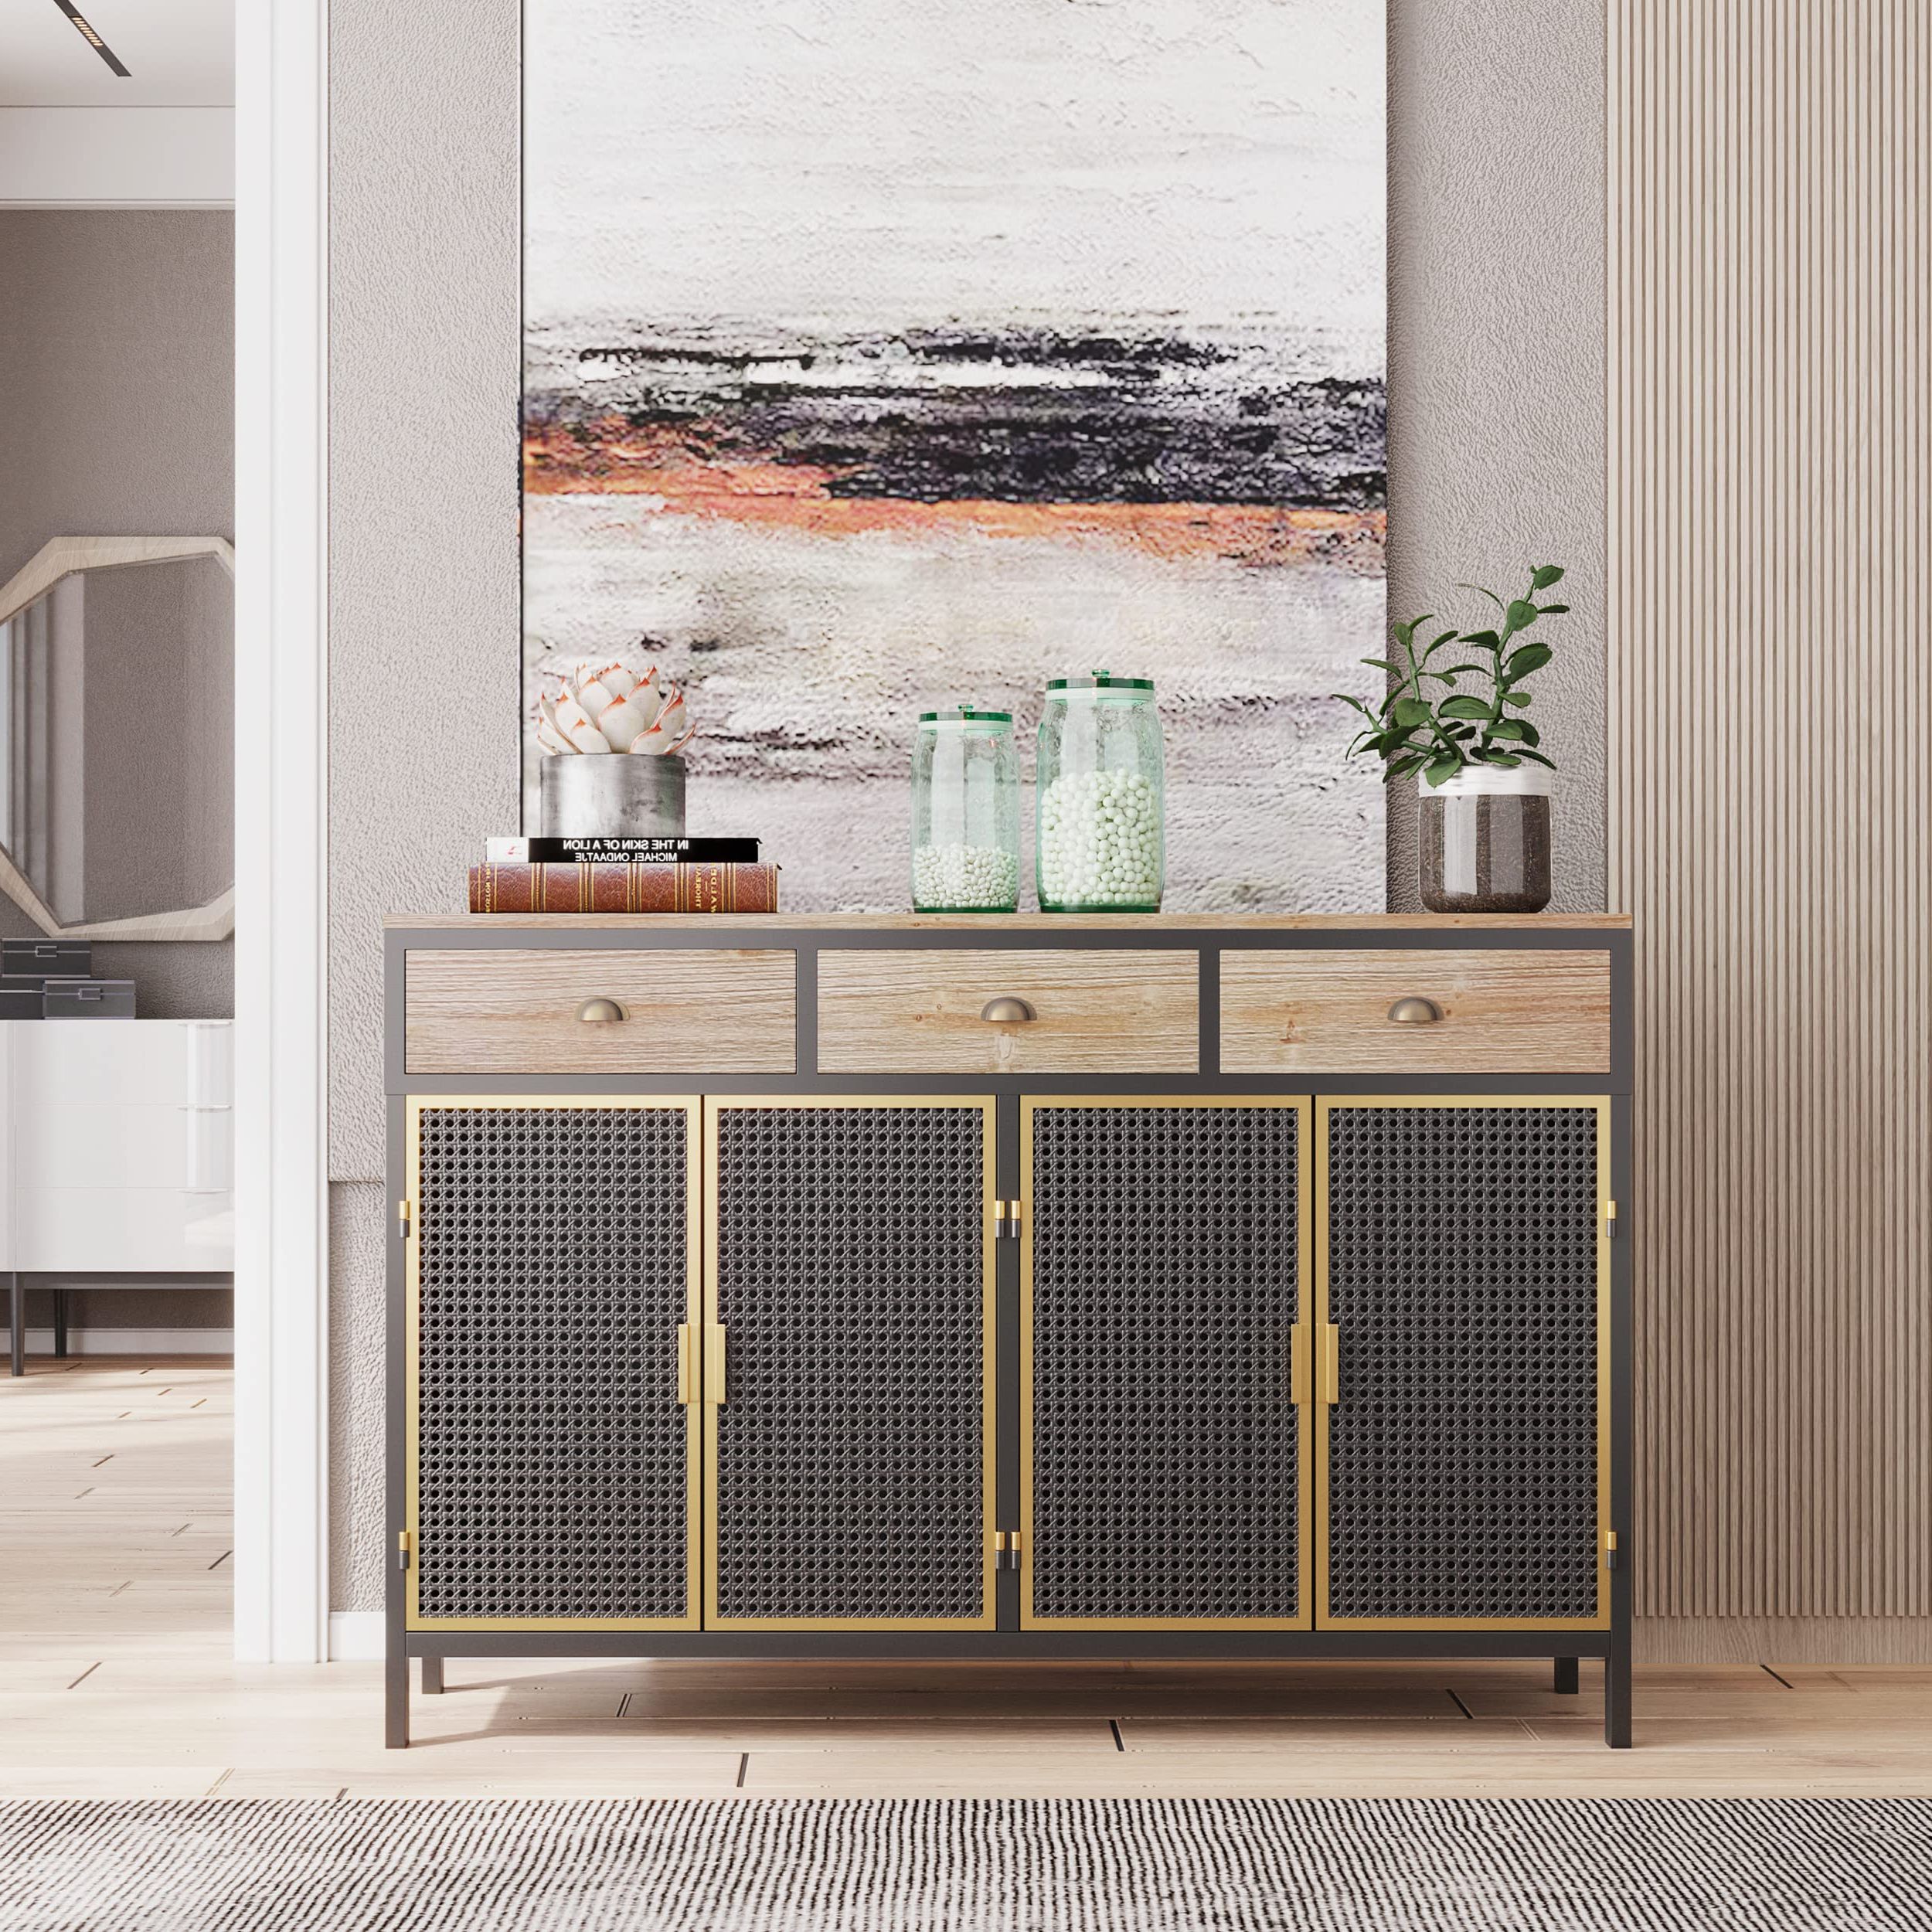 Widely Used Sideboards With Breathable Mesh Doors Inside Amazon: Lamerge Modern Sideboard, (View 5 of 10)